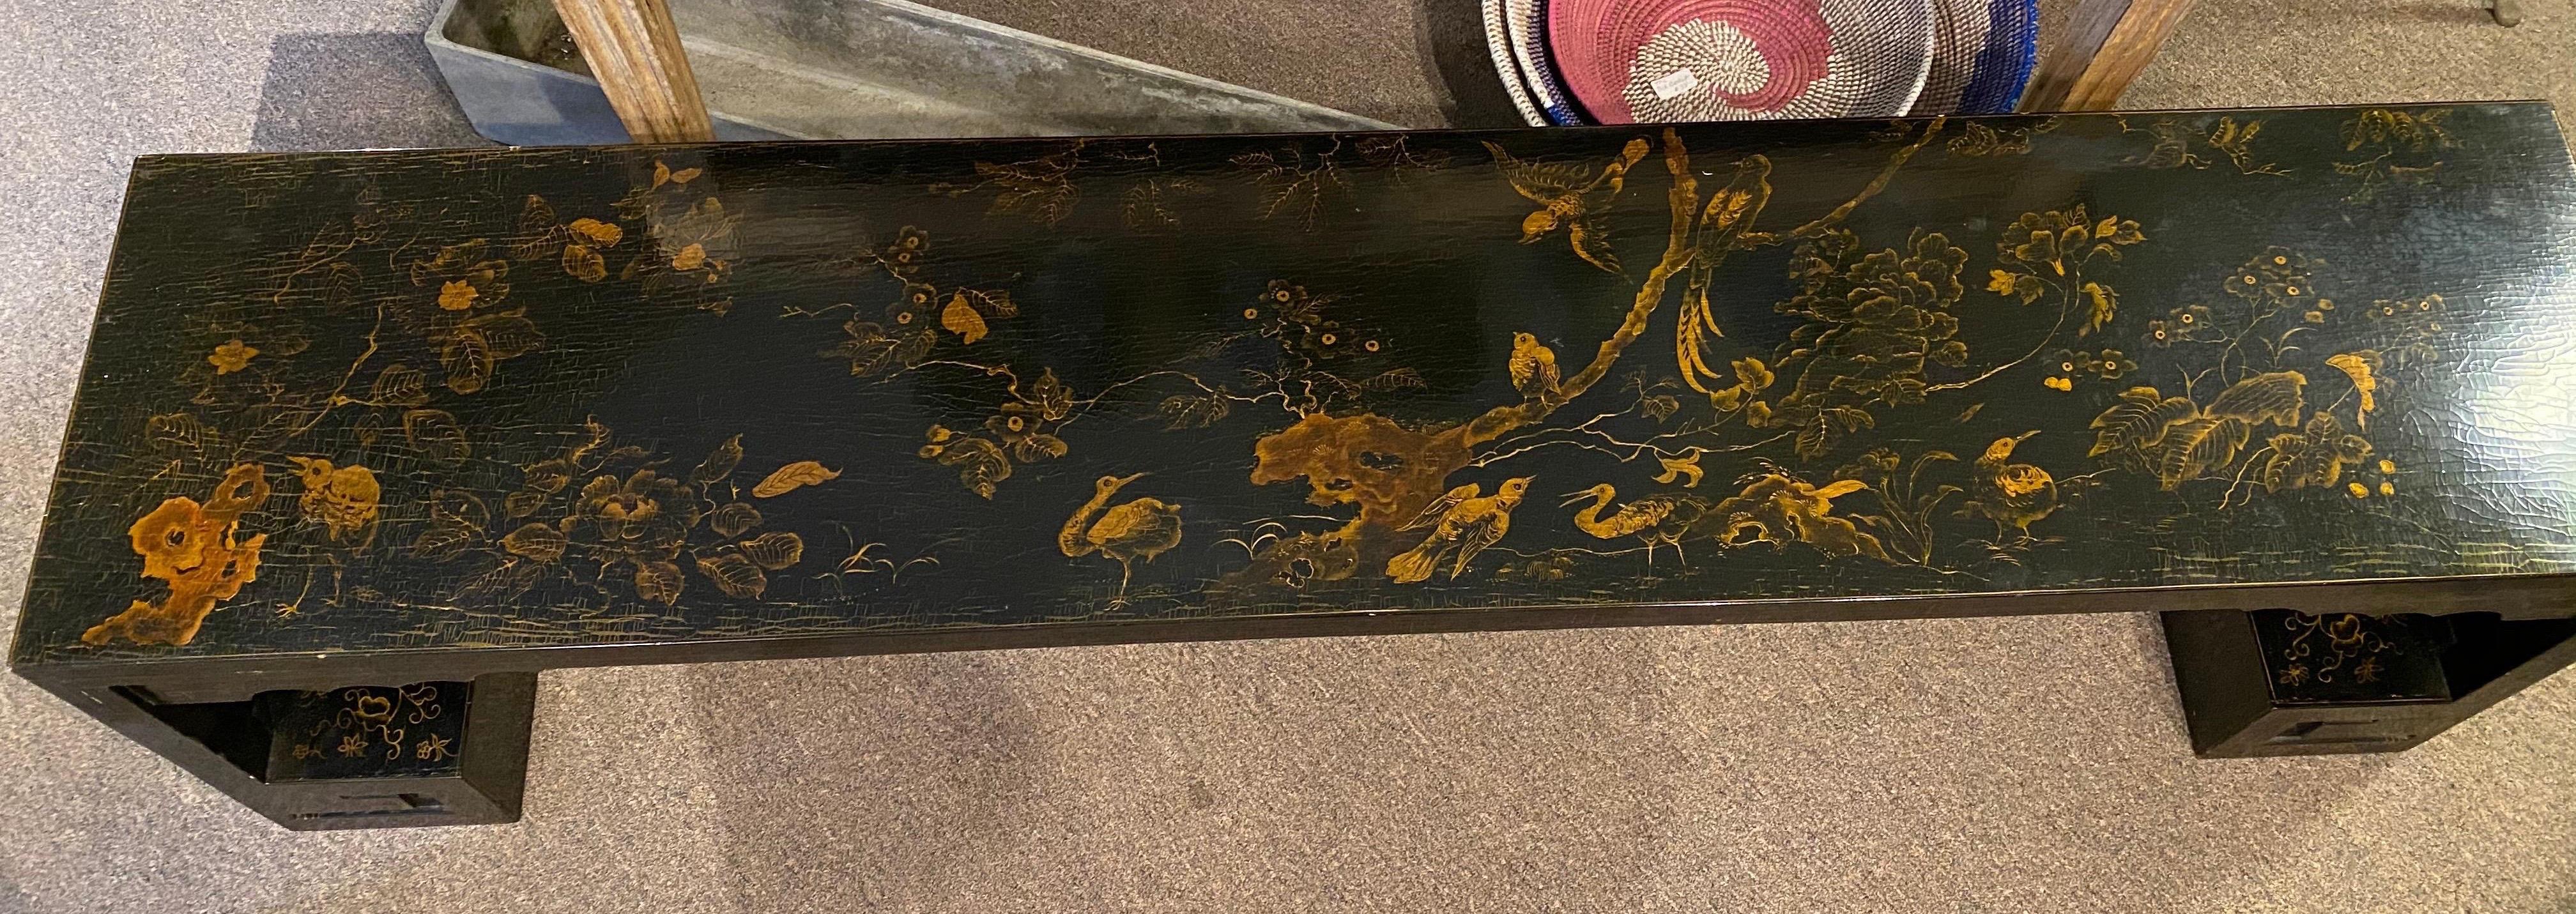 Great quality midcentury chinoiserie coffee table or bench. Hand decorated with gilt and lacquered, the piece is made up of 